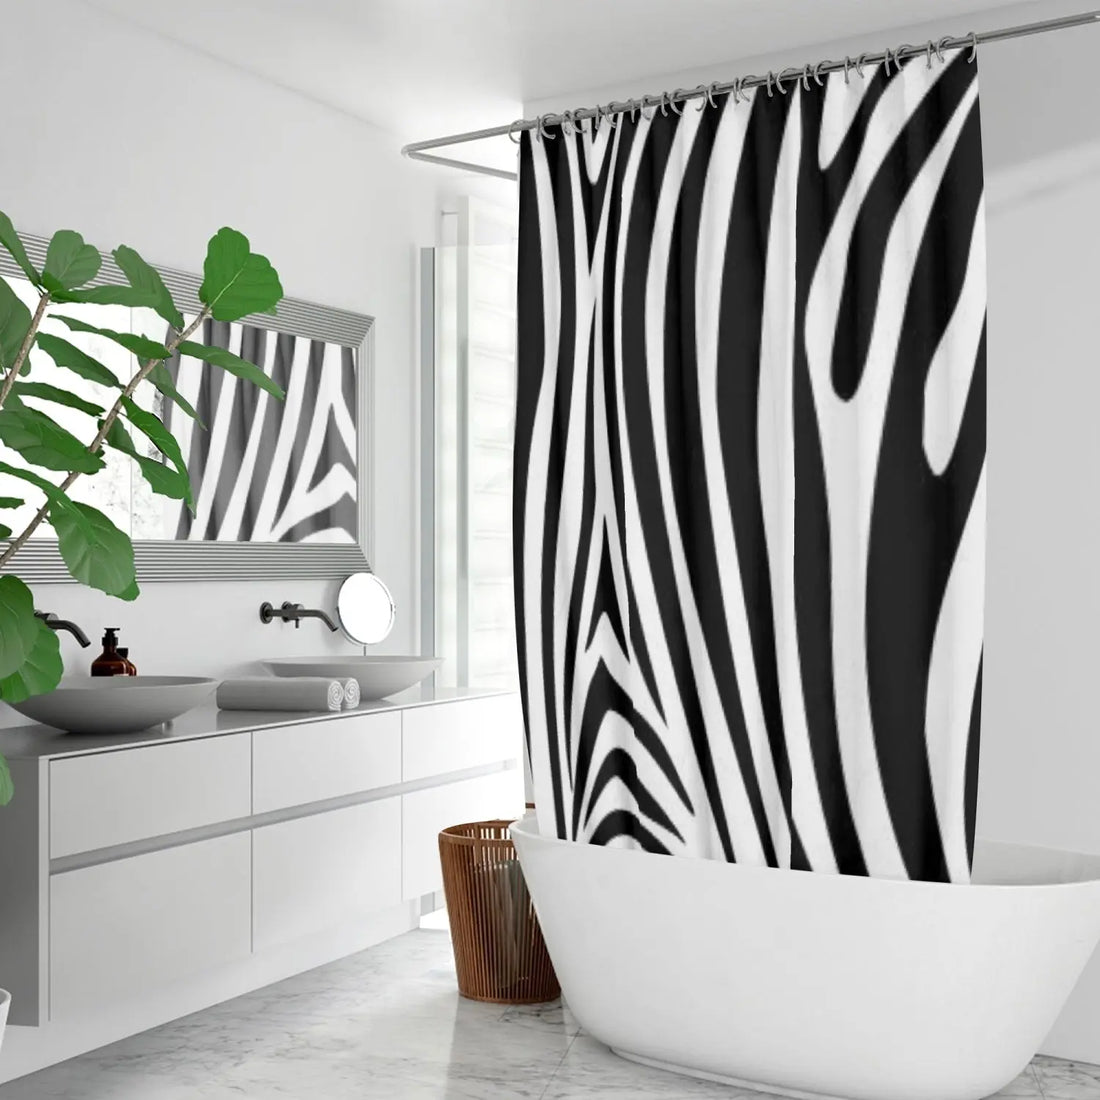 Quick-drying Shower Curtain Black and White Home-clothes-jewelry